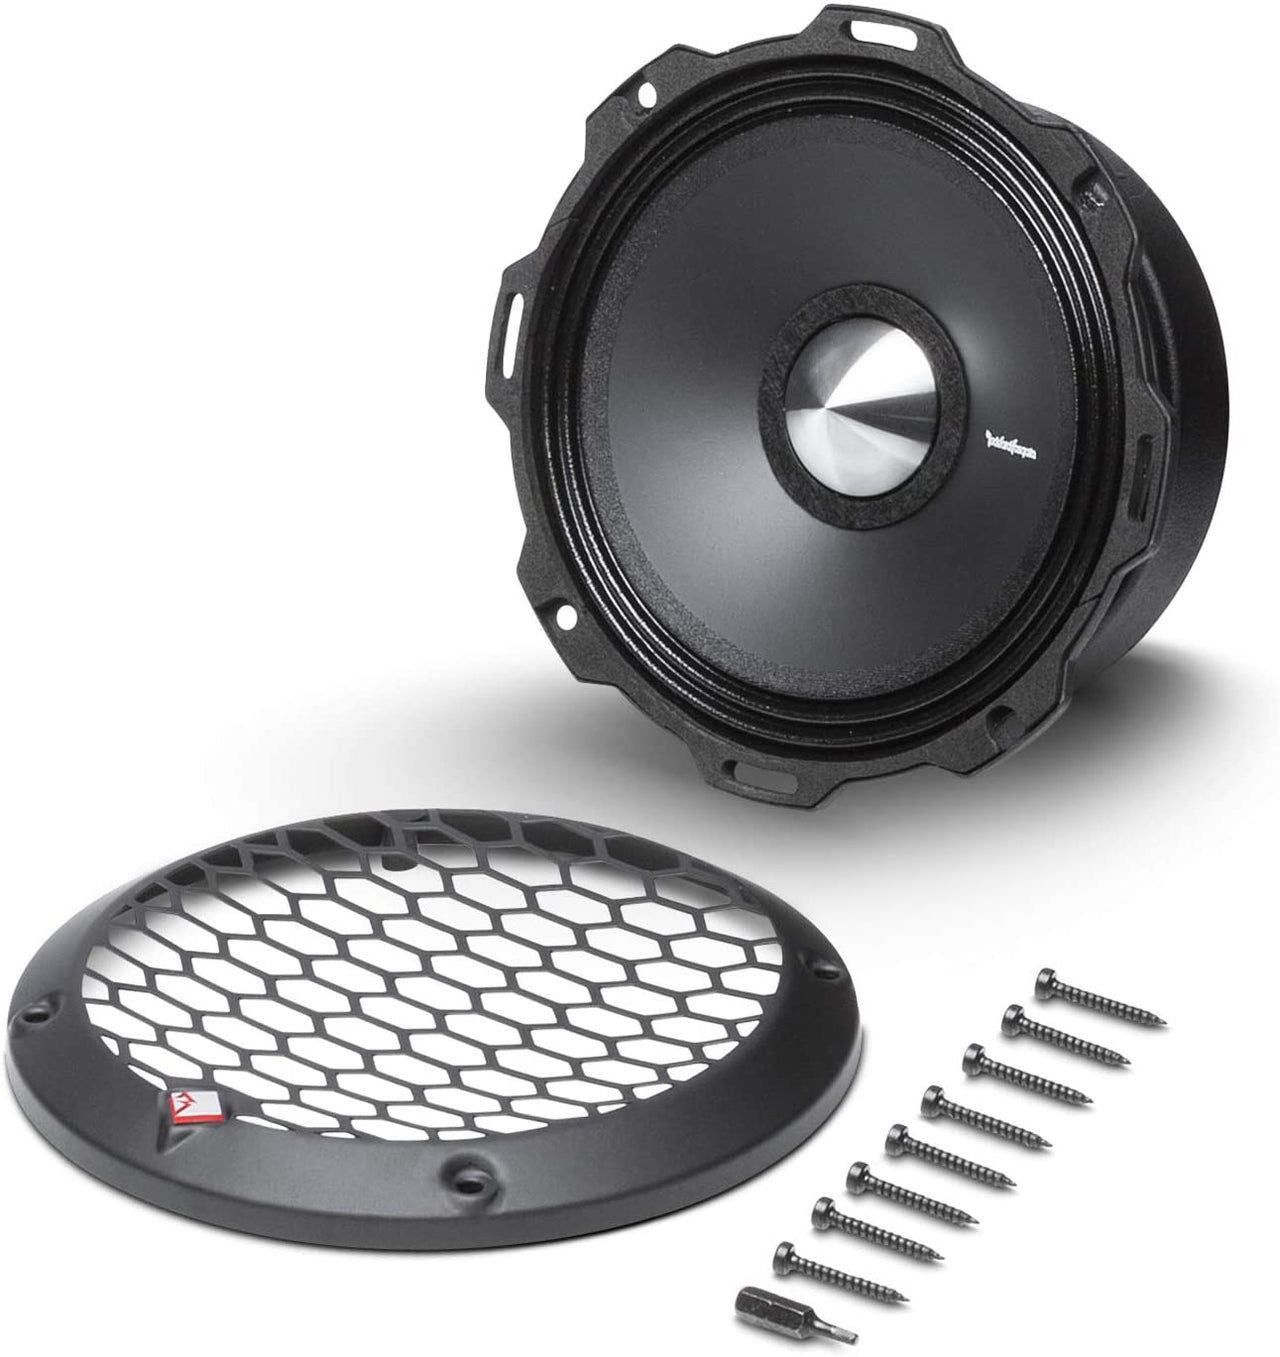 Rockford Fosgate PPS4-6 6.5" 400W 4-Ohm Midrange Car Audio Speaker with Fiber Reinforced Paper Cone and Stamp Cast Aluminum Frame